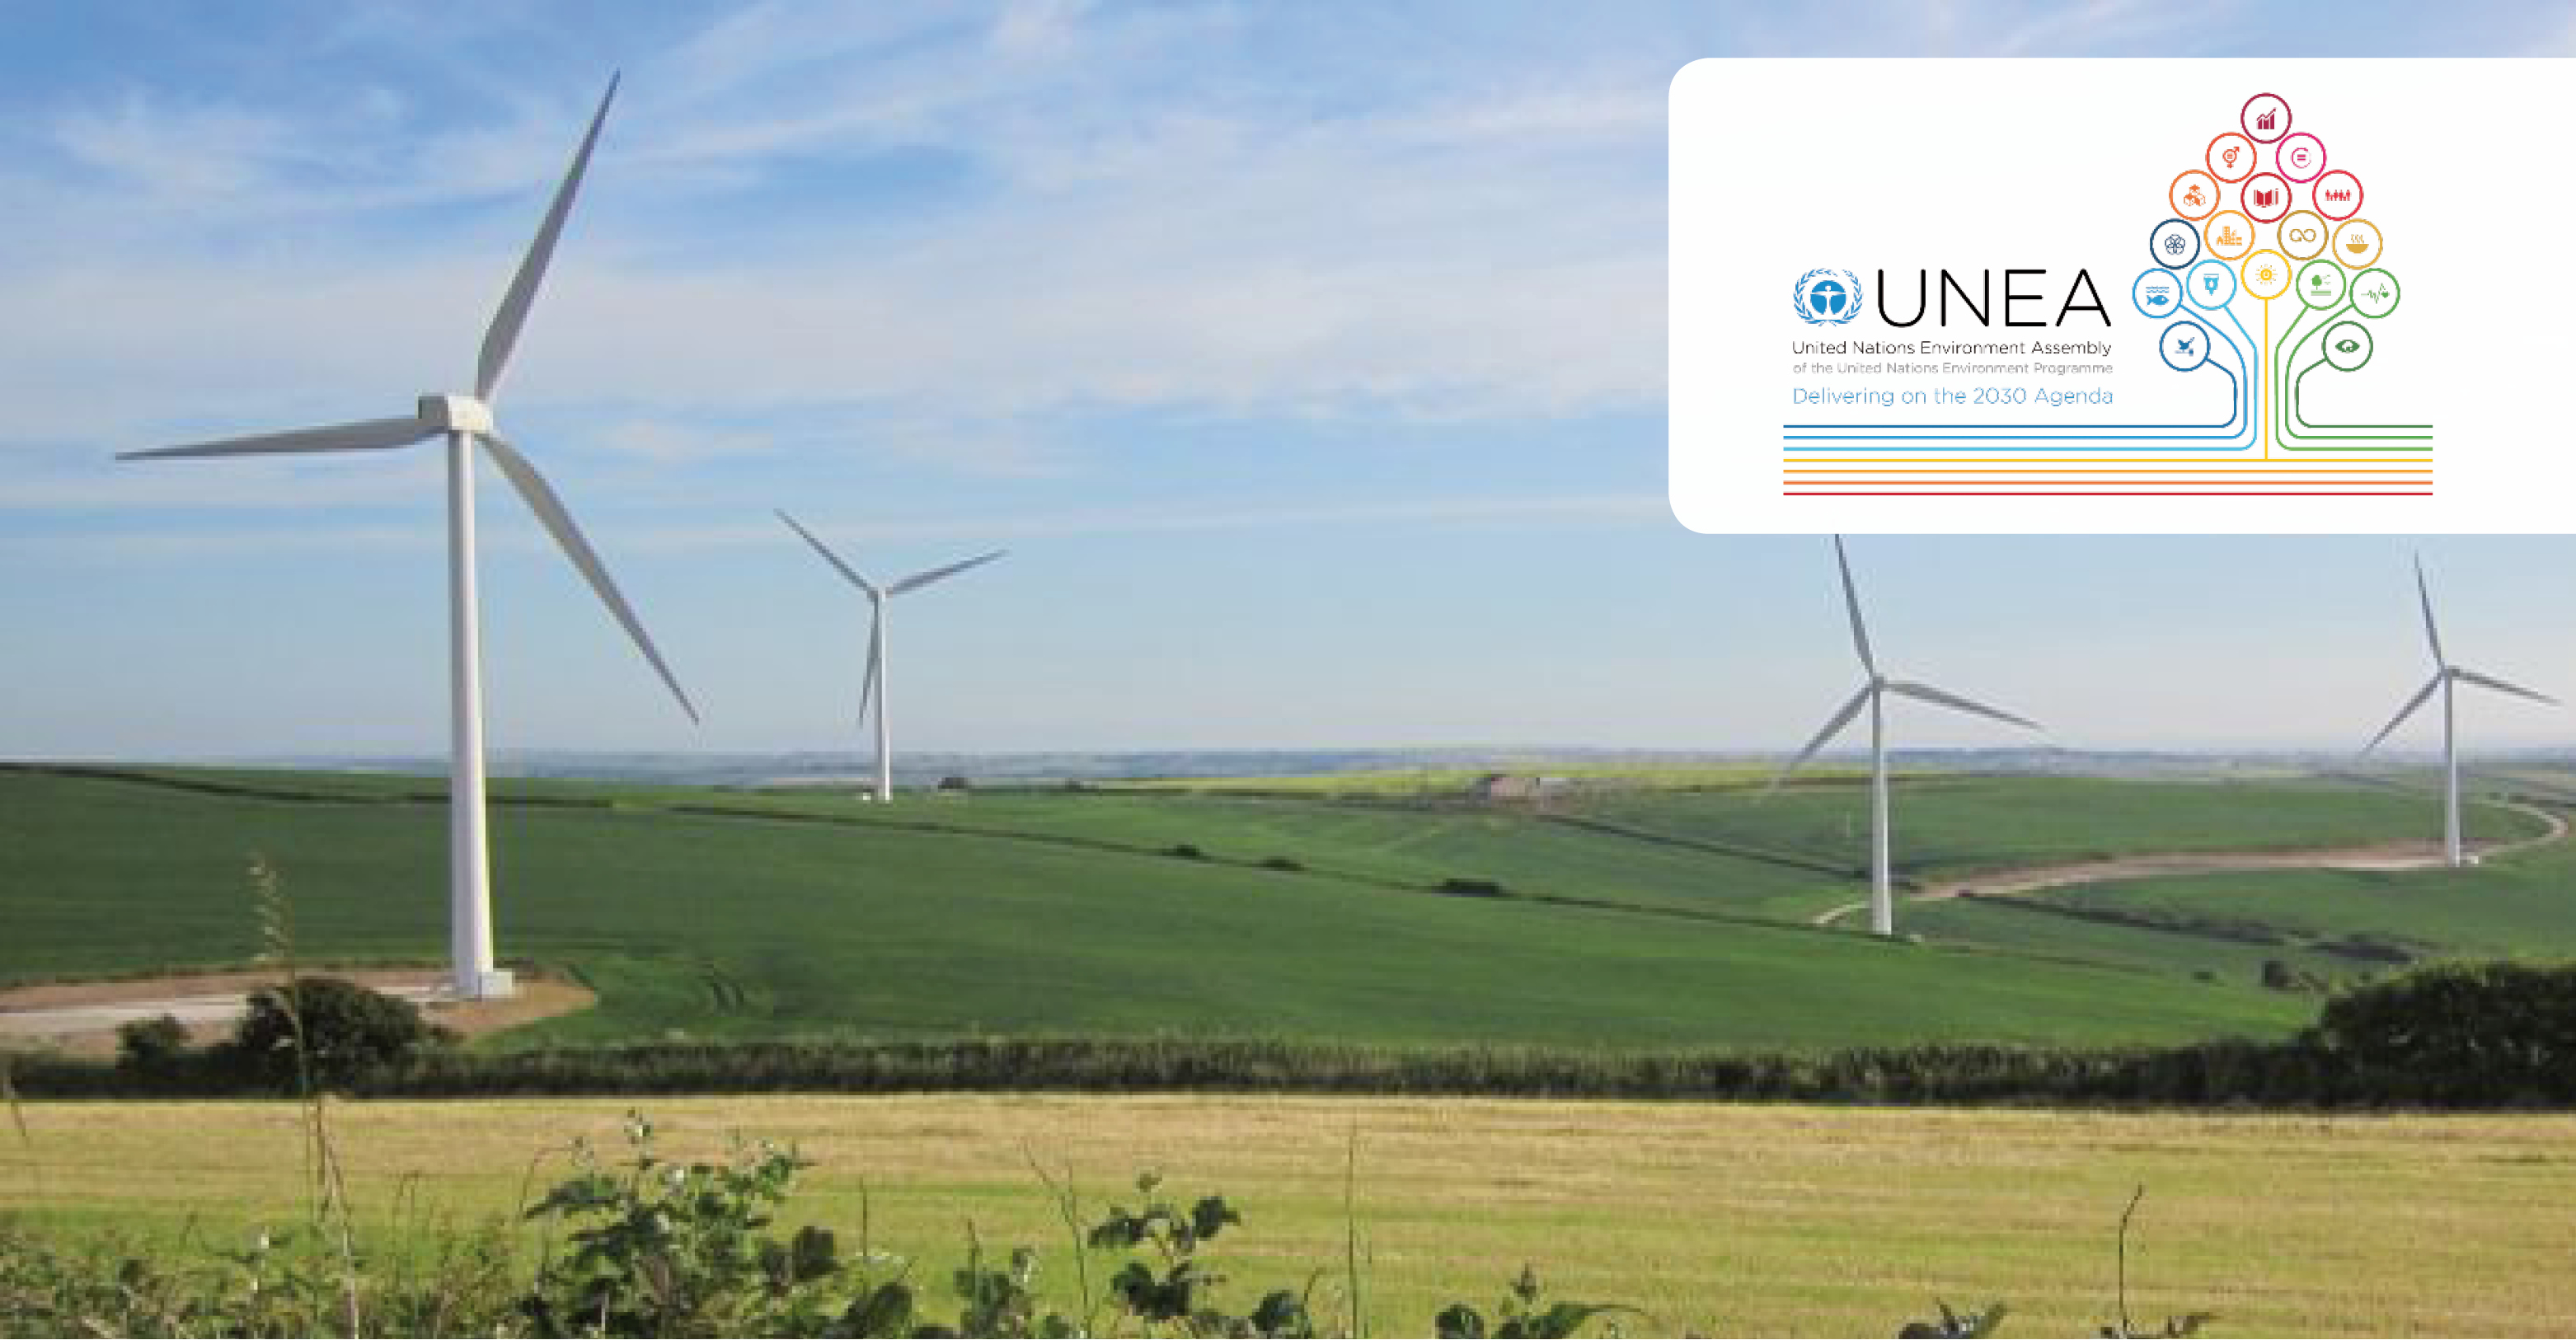 Wind farm in the UK © Robert Vagg, UNEP/CMS